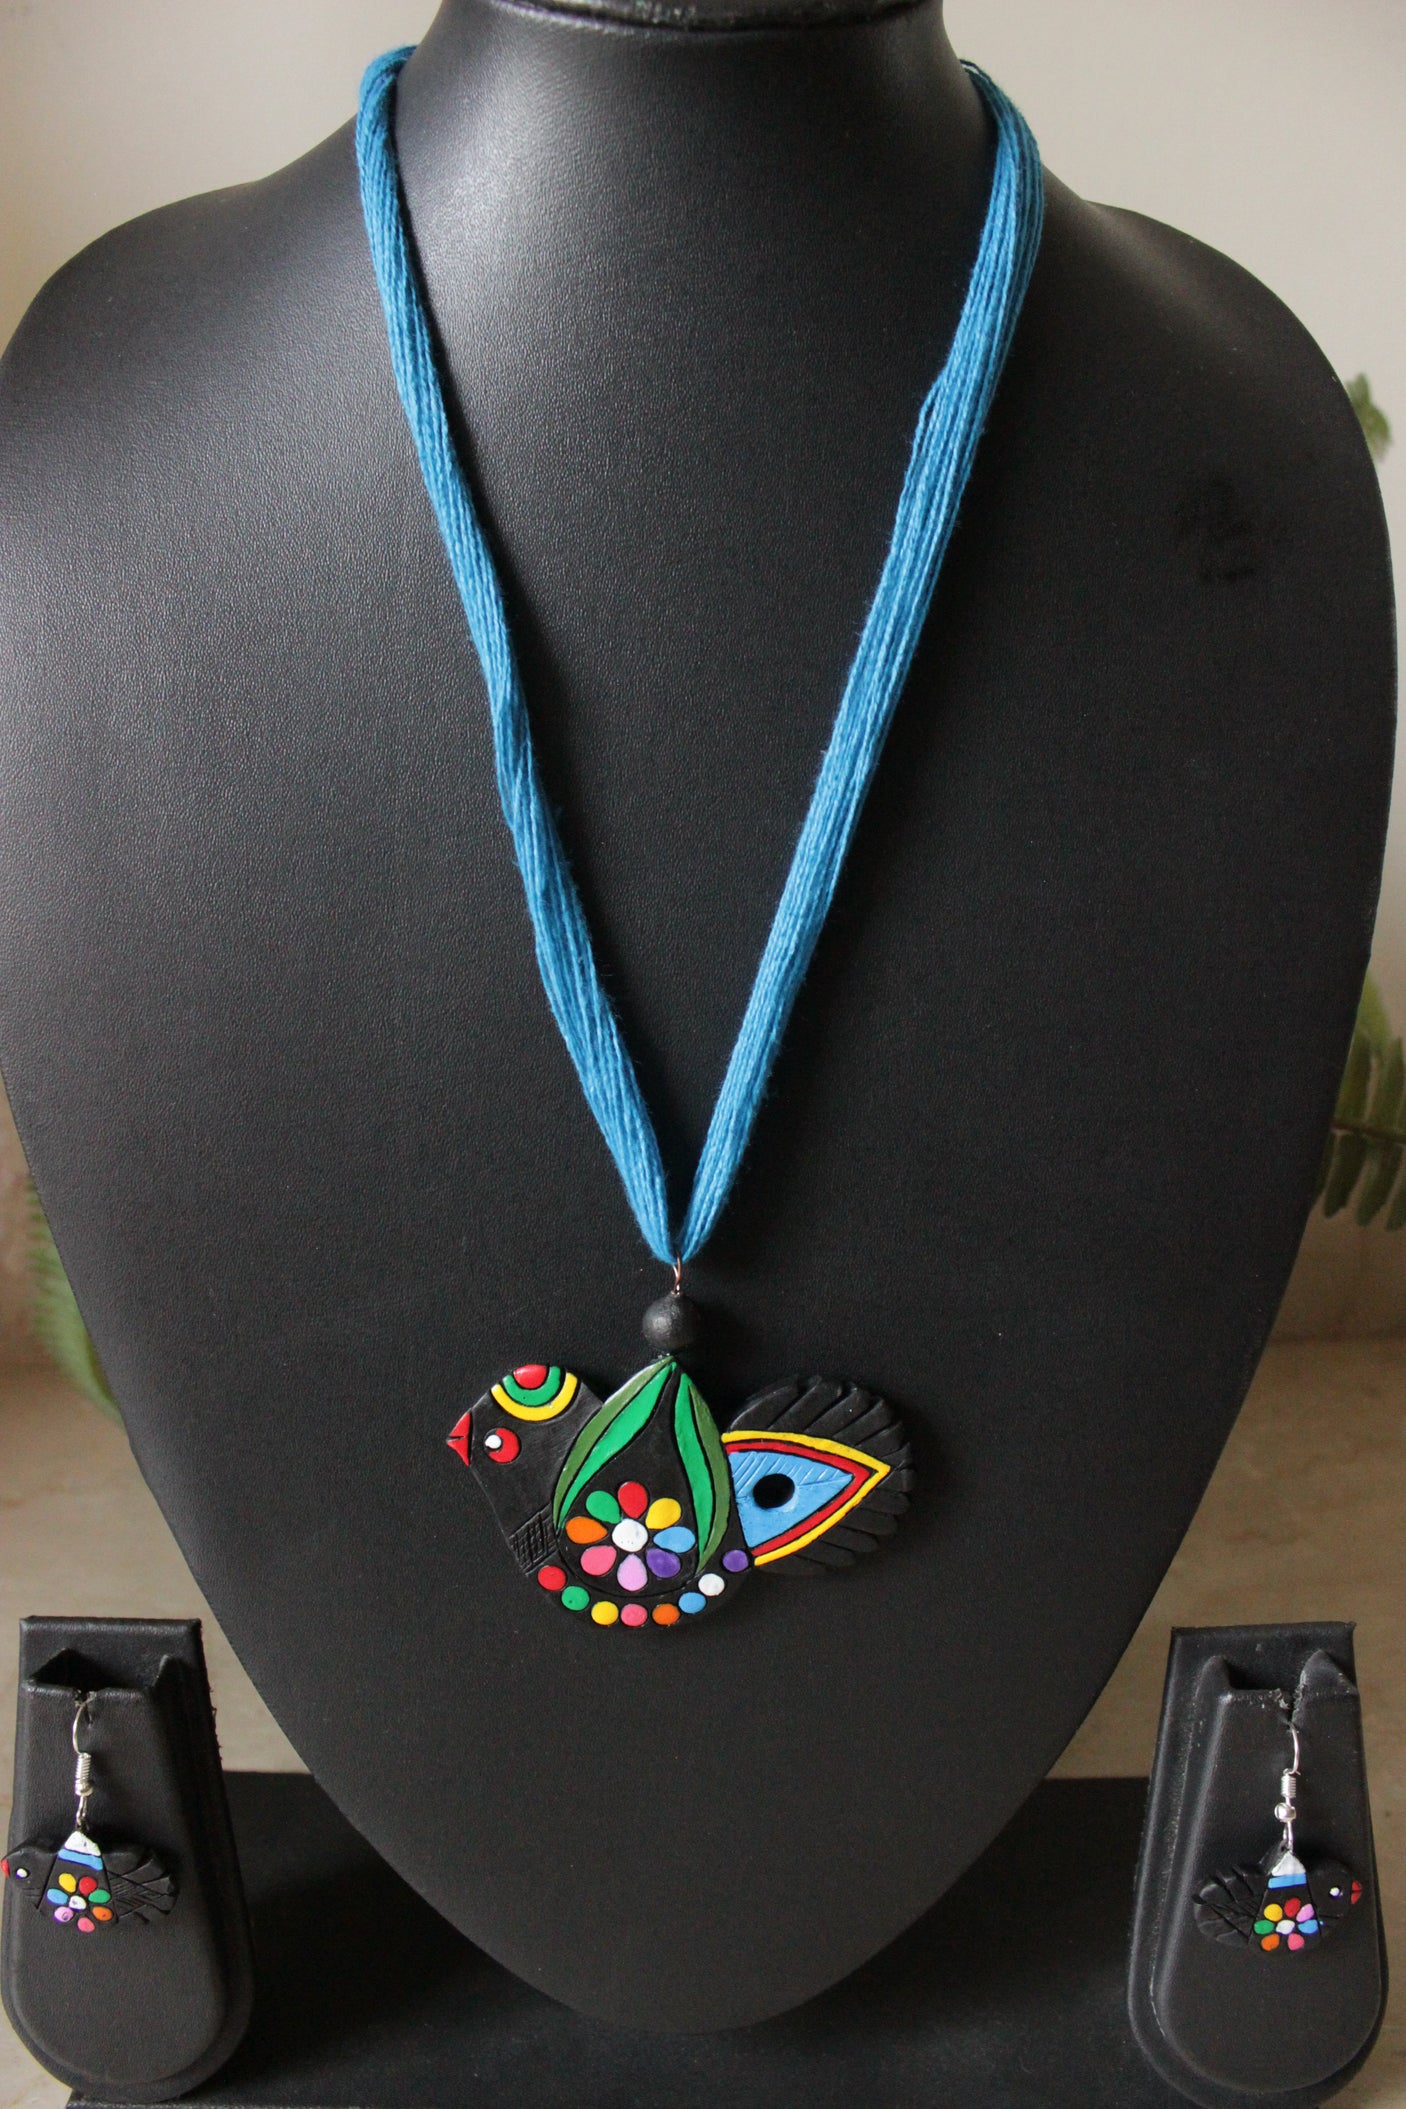 Handcrafted Terracotta Clay Bird Pendant Adjustable Length Necklace Set